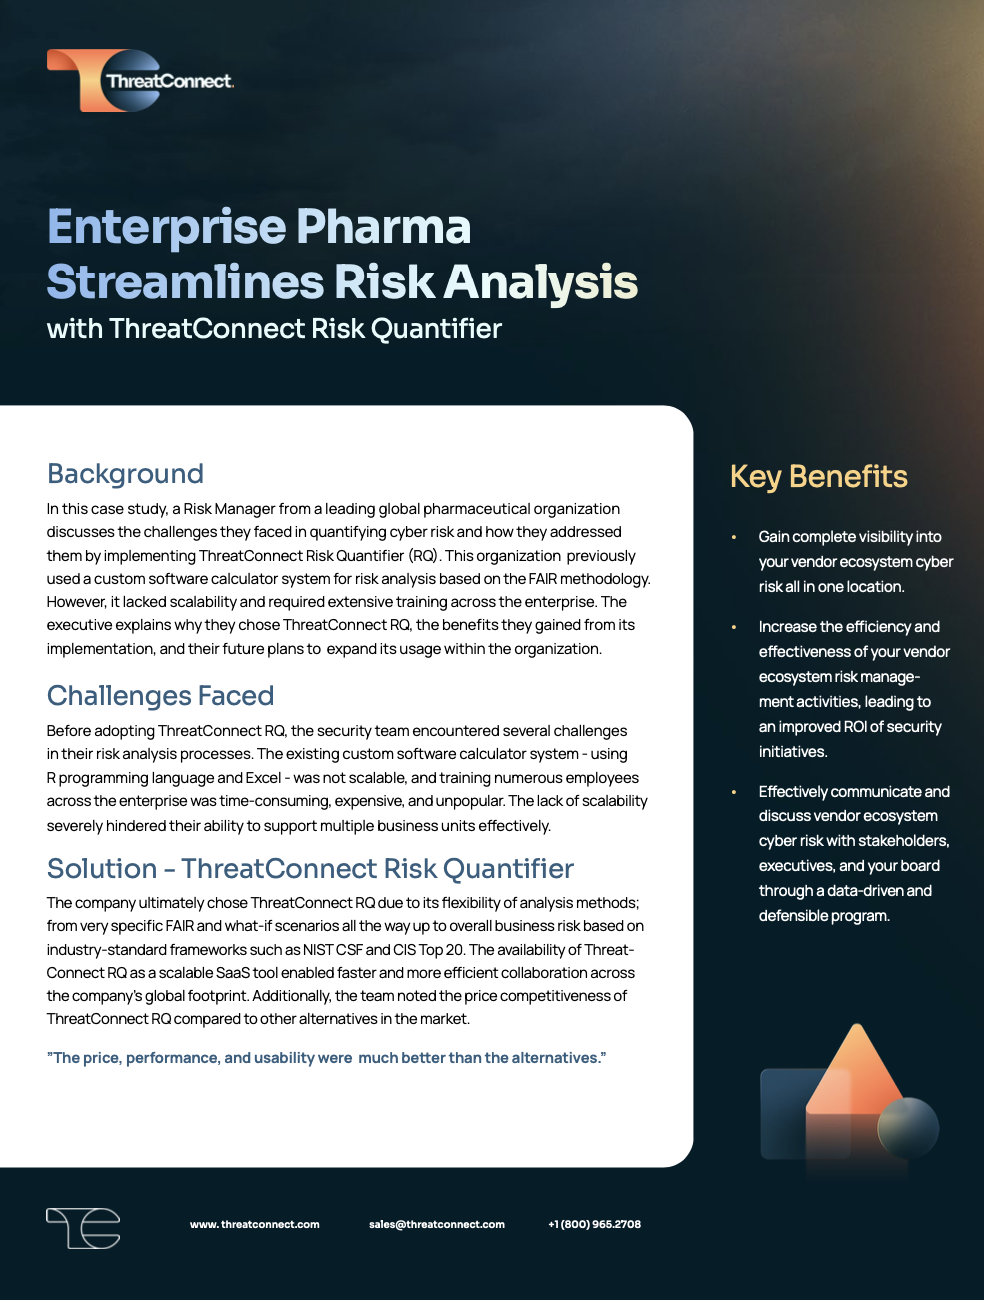 cover image for the ThreatConnect case study on enterprise pharma and streamlining risk analysis